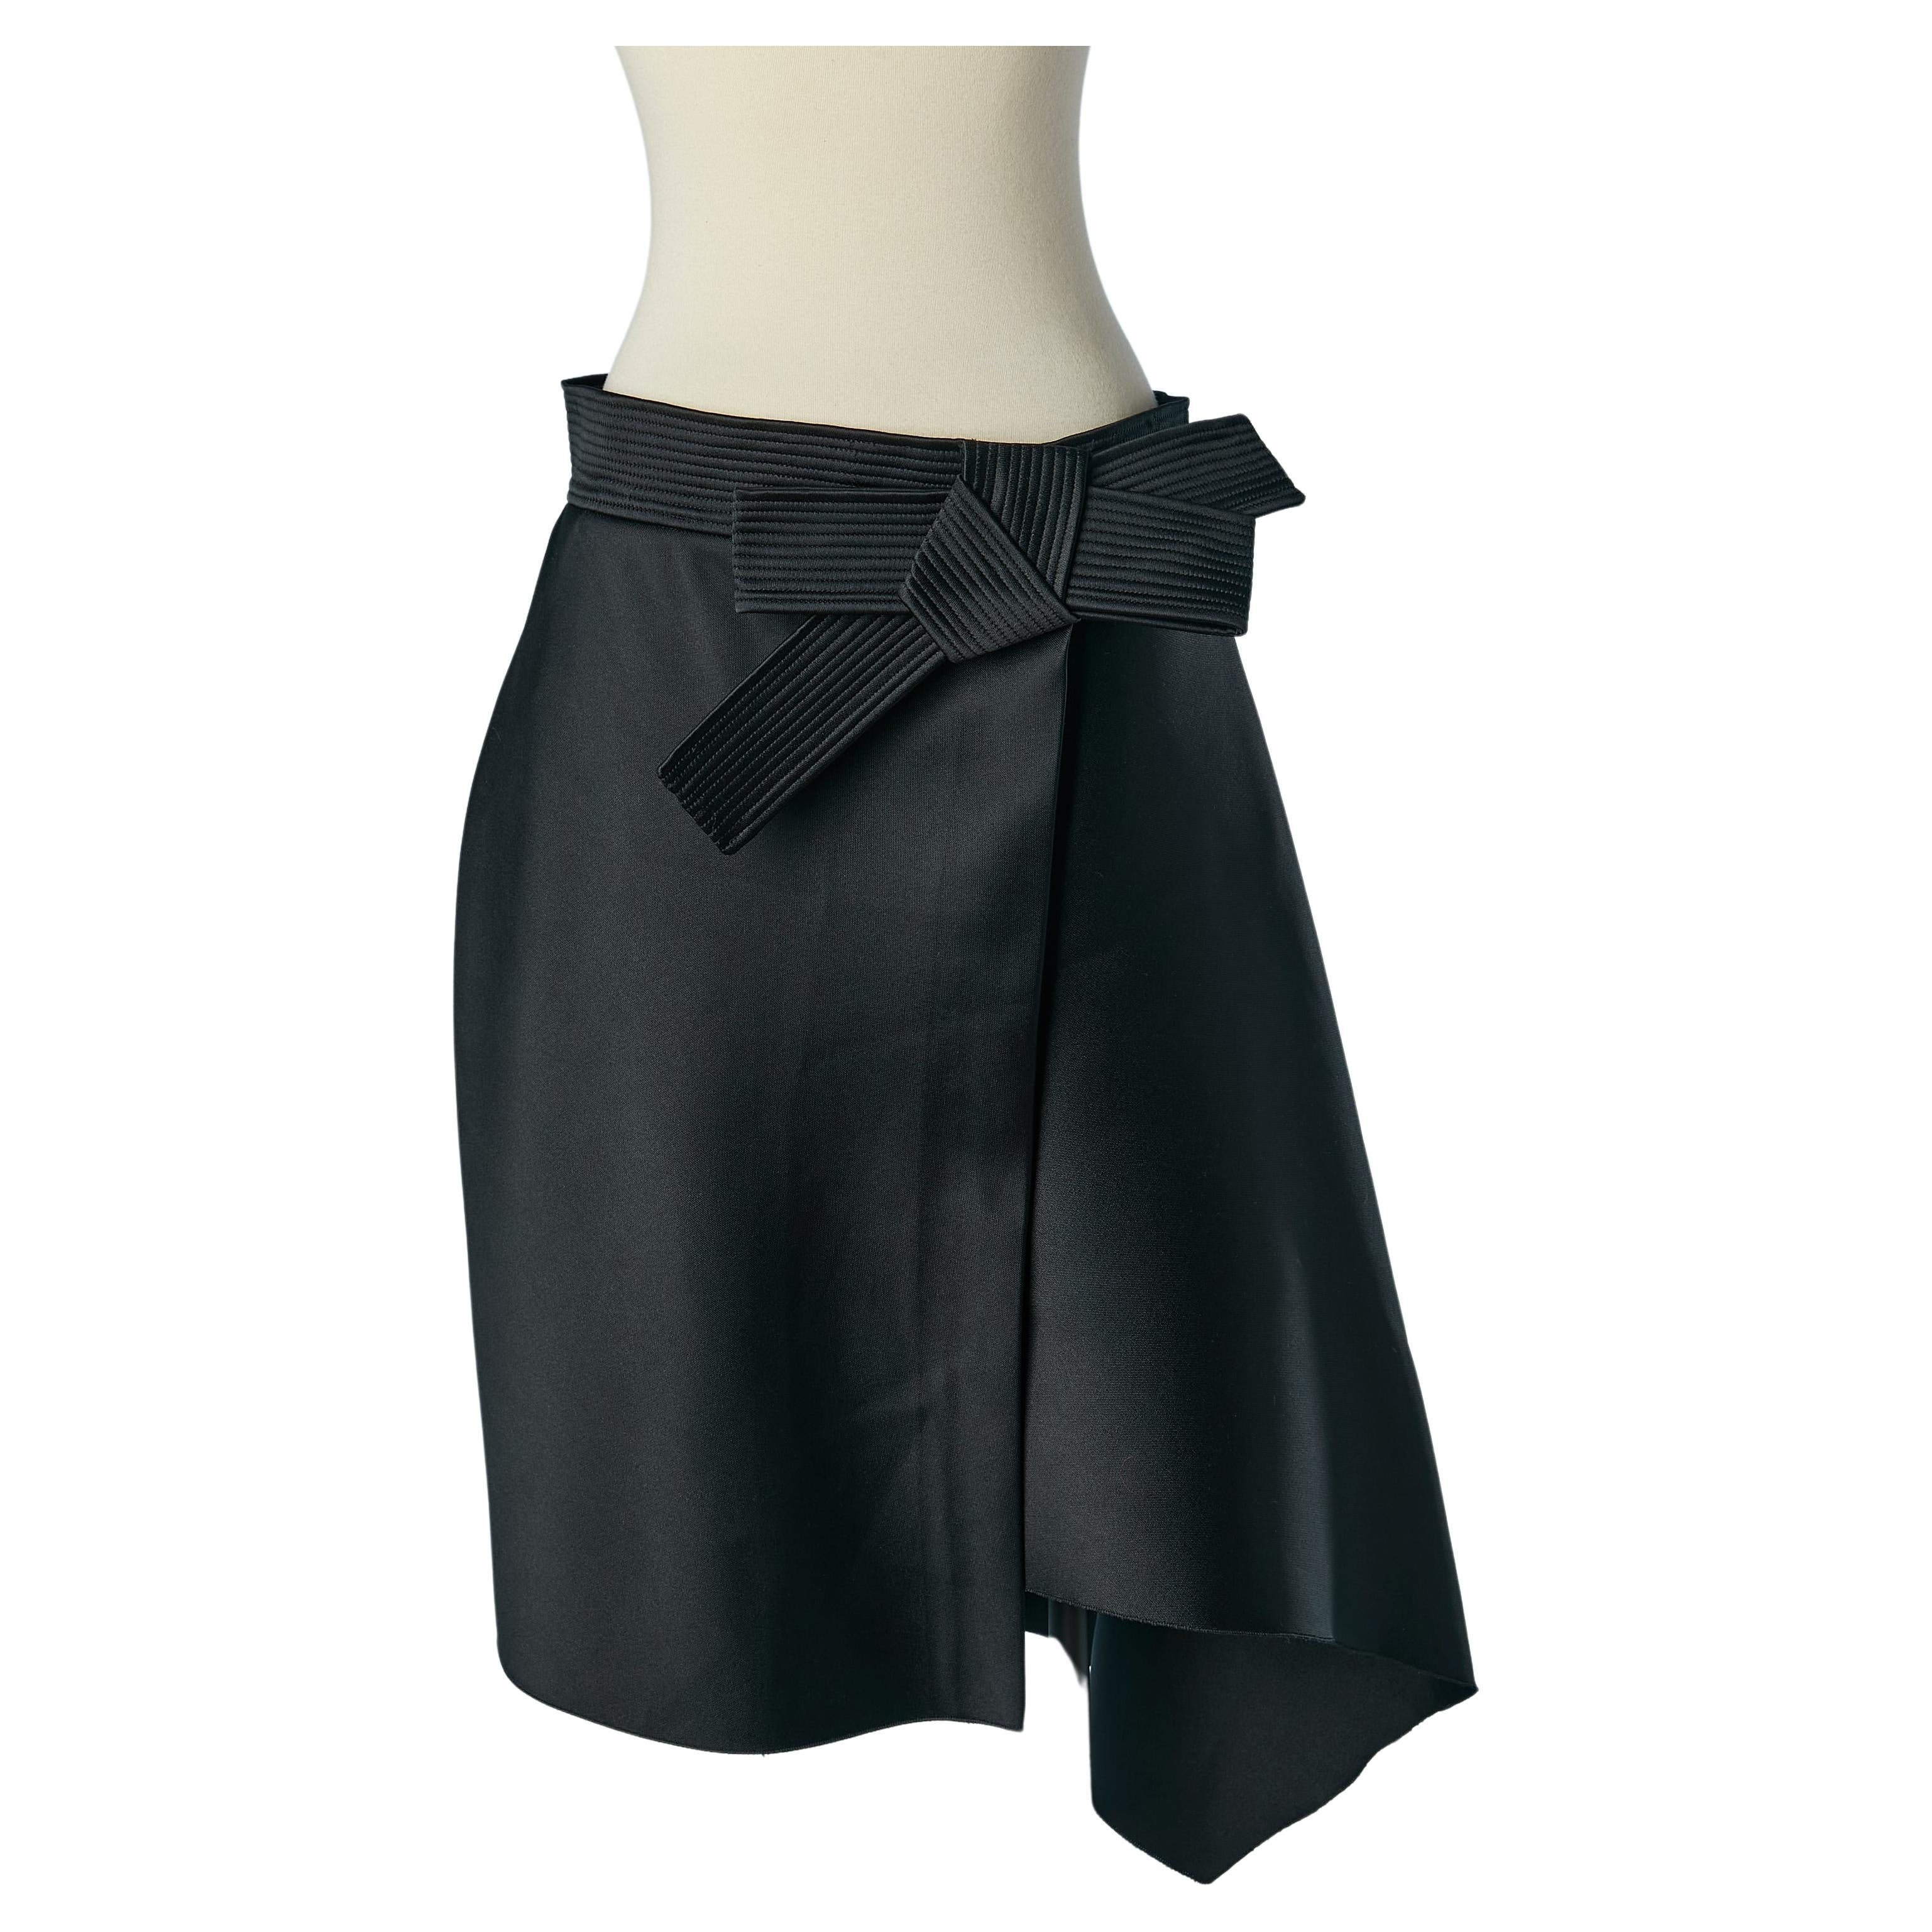 Black asymmetrical wrap skirt with bow Lanvin by Alber Elbaz SS 2013 For Sale